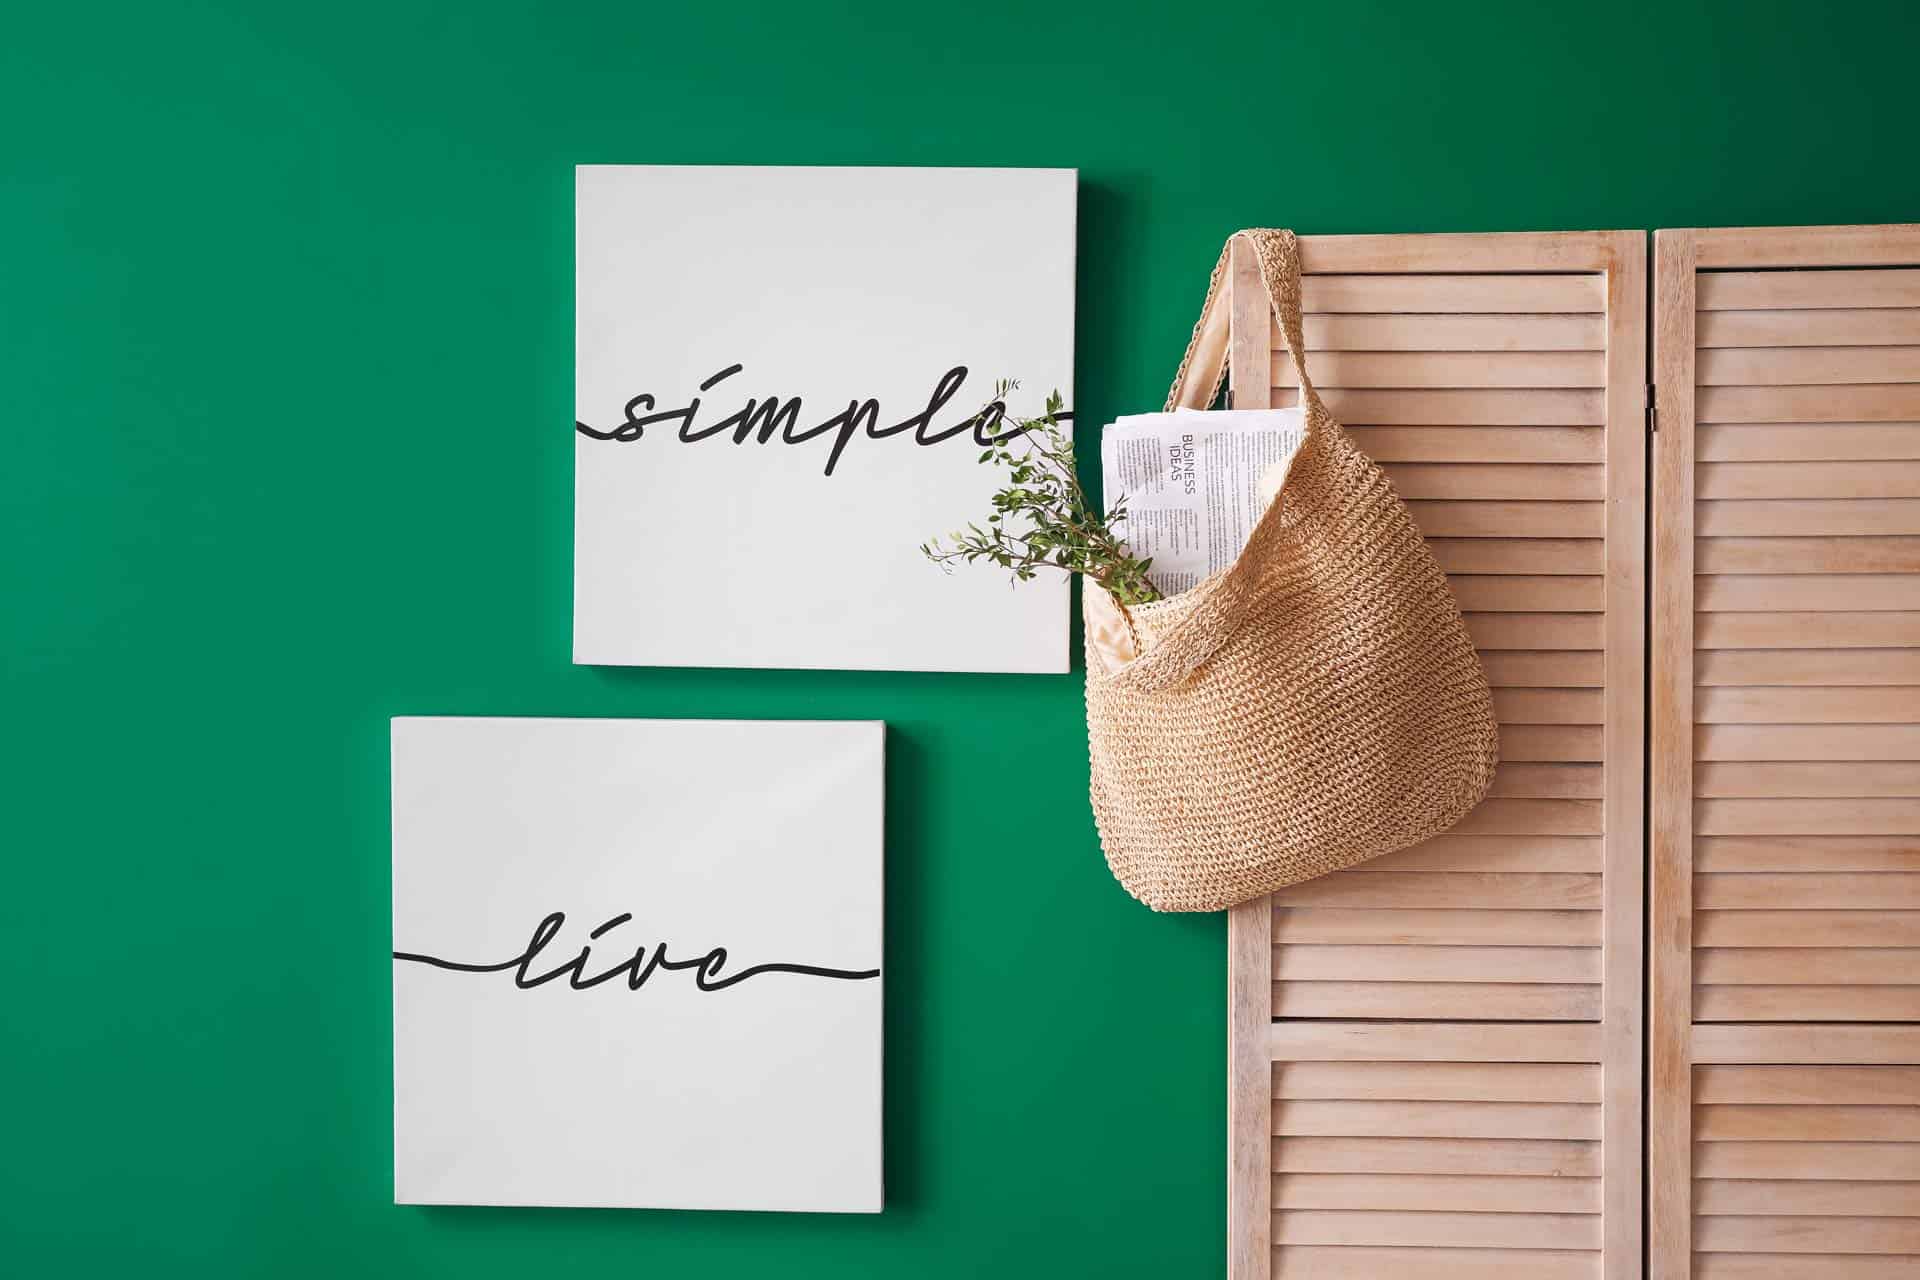 Wood screen and green wall with text about benefits of simplifying your life